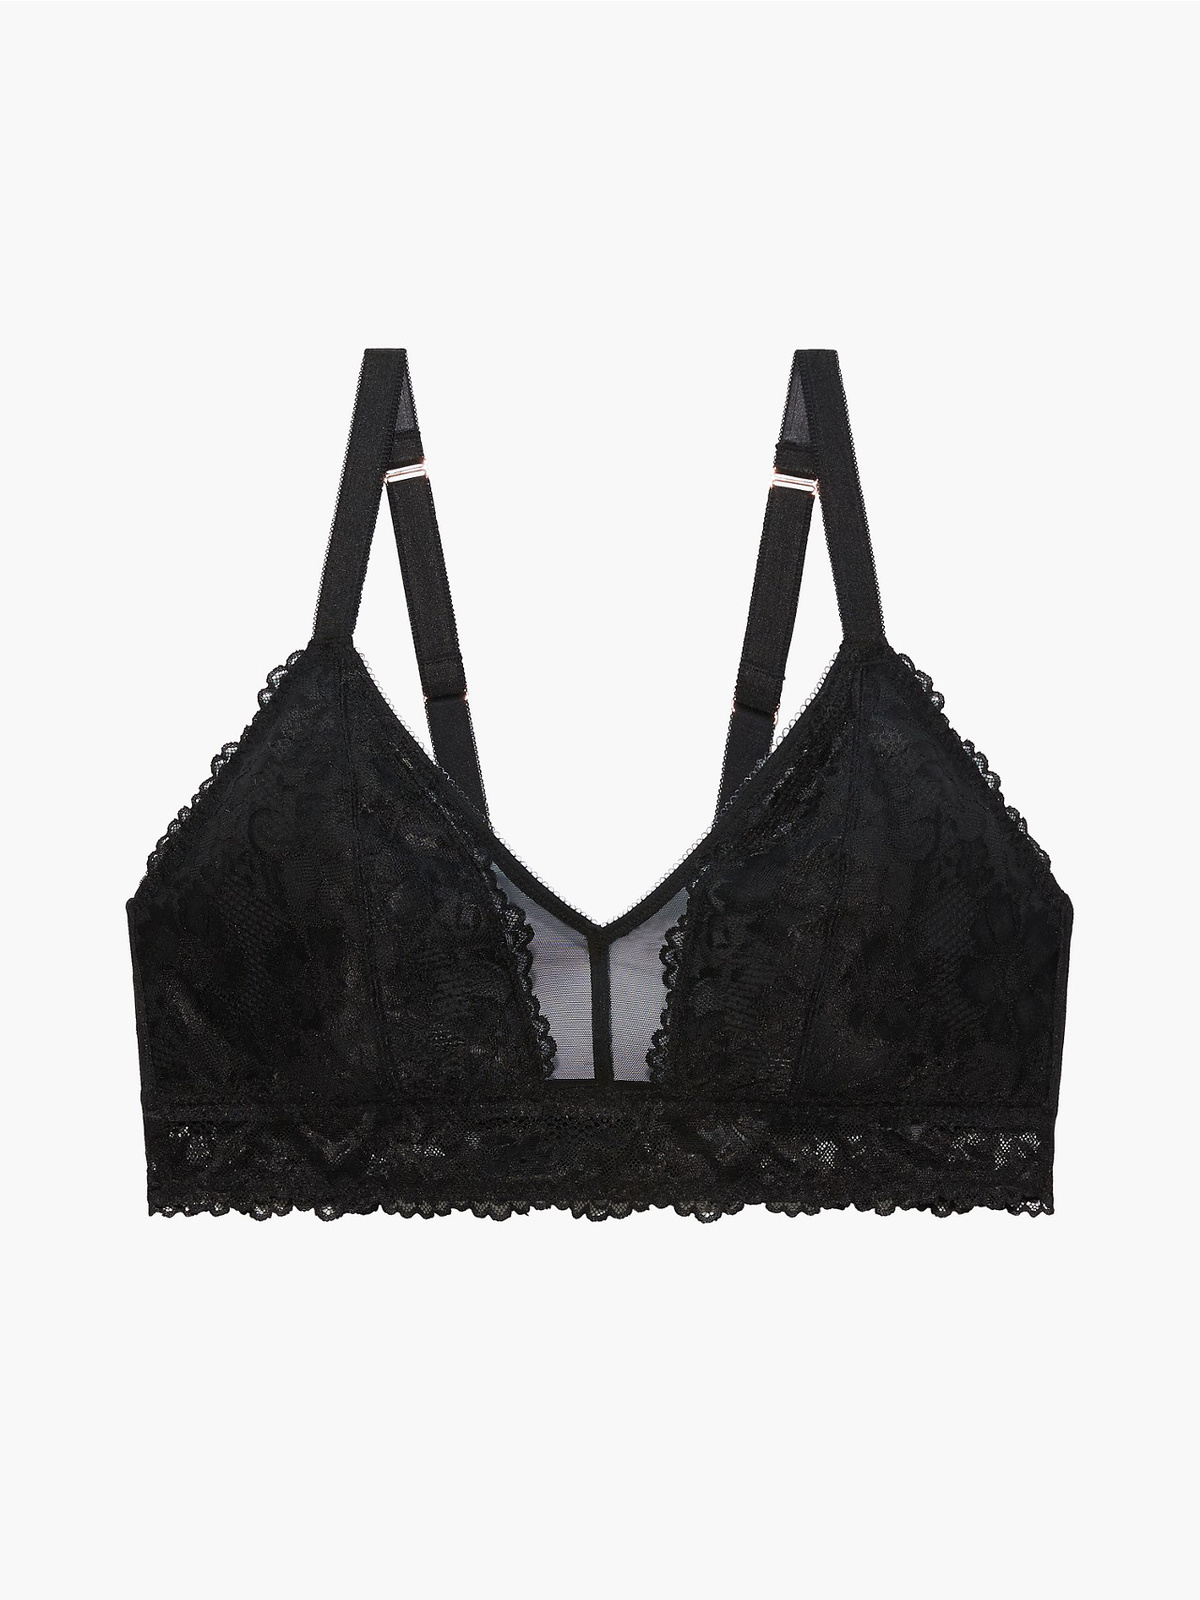 https://cdn.savagex.com/media/images/products/BB1934841-0001/FLORAL-LACE-AND-MESH-BRALETTE-BB1934841-0001-LAYDOWN-1200x1600.jpg